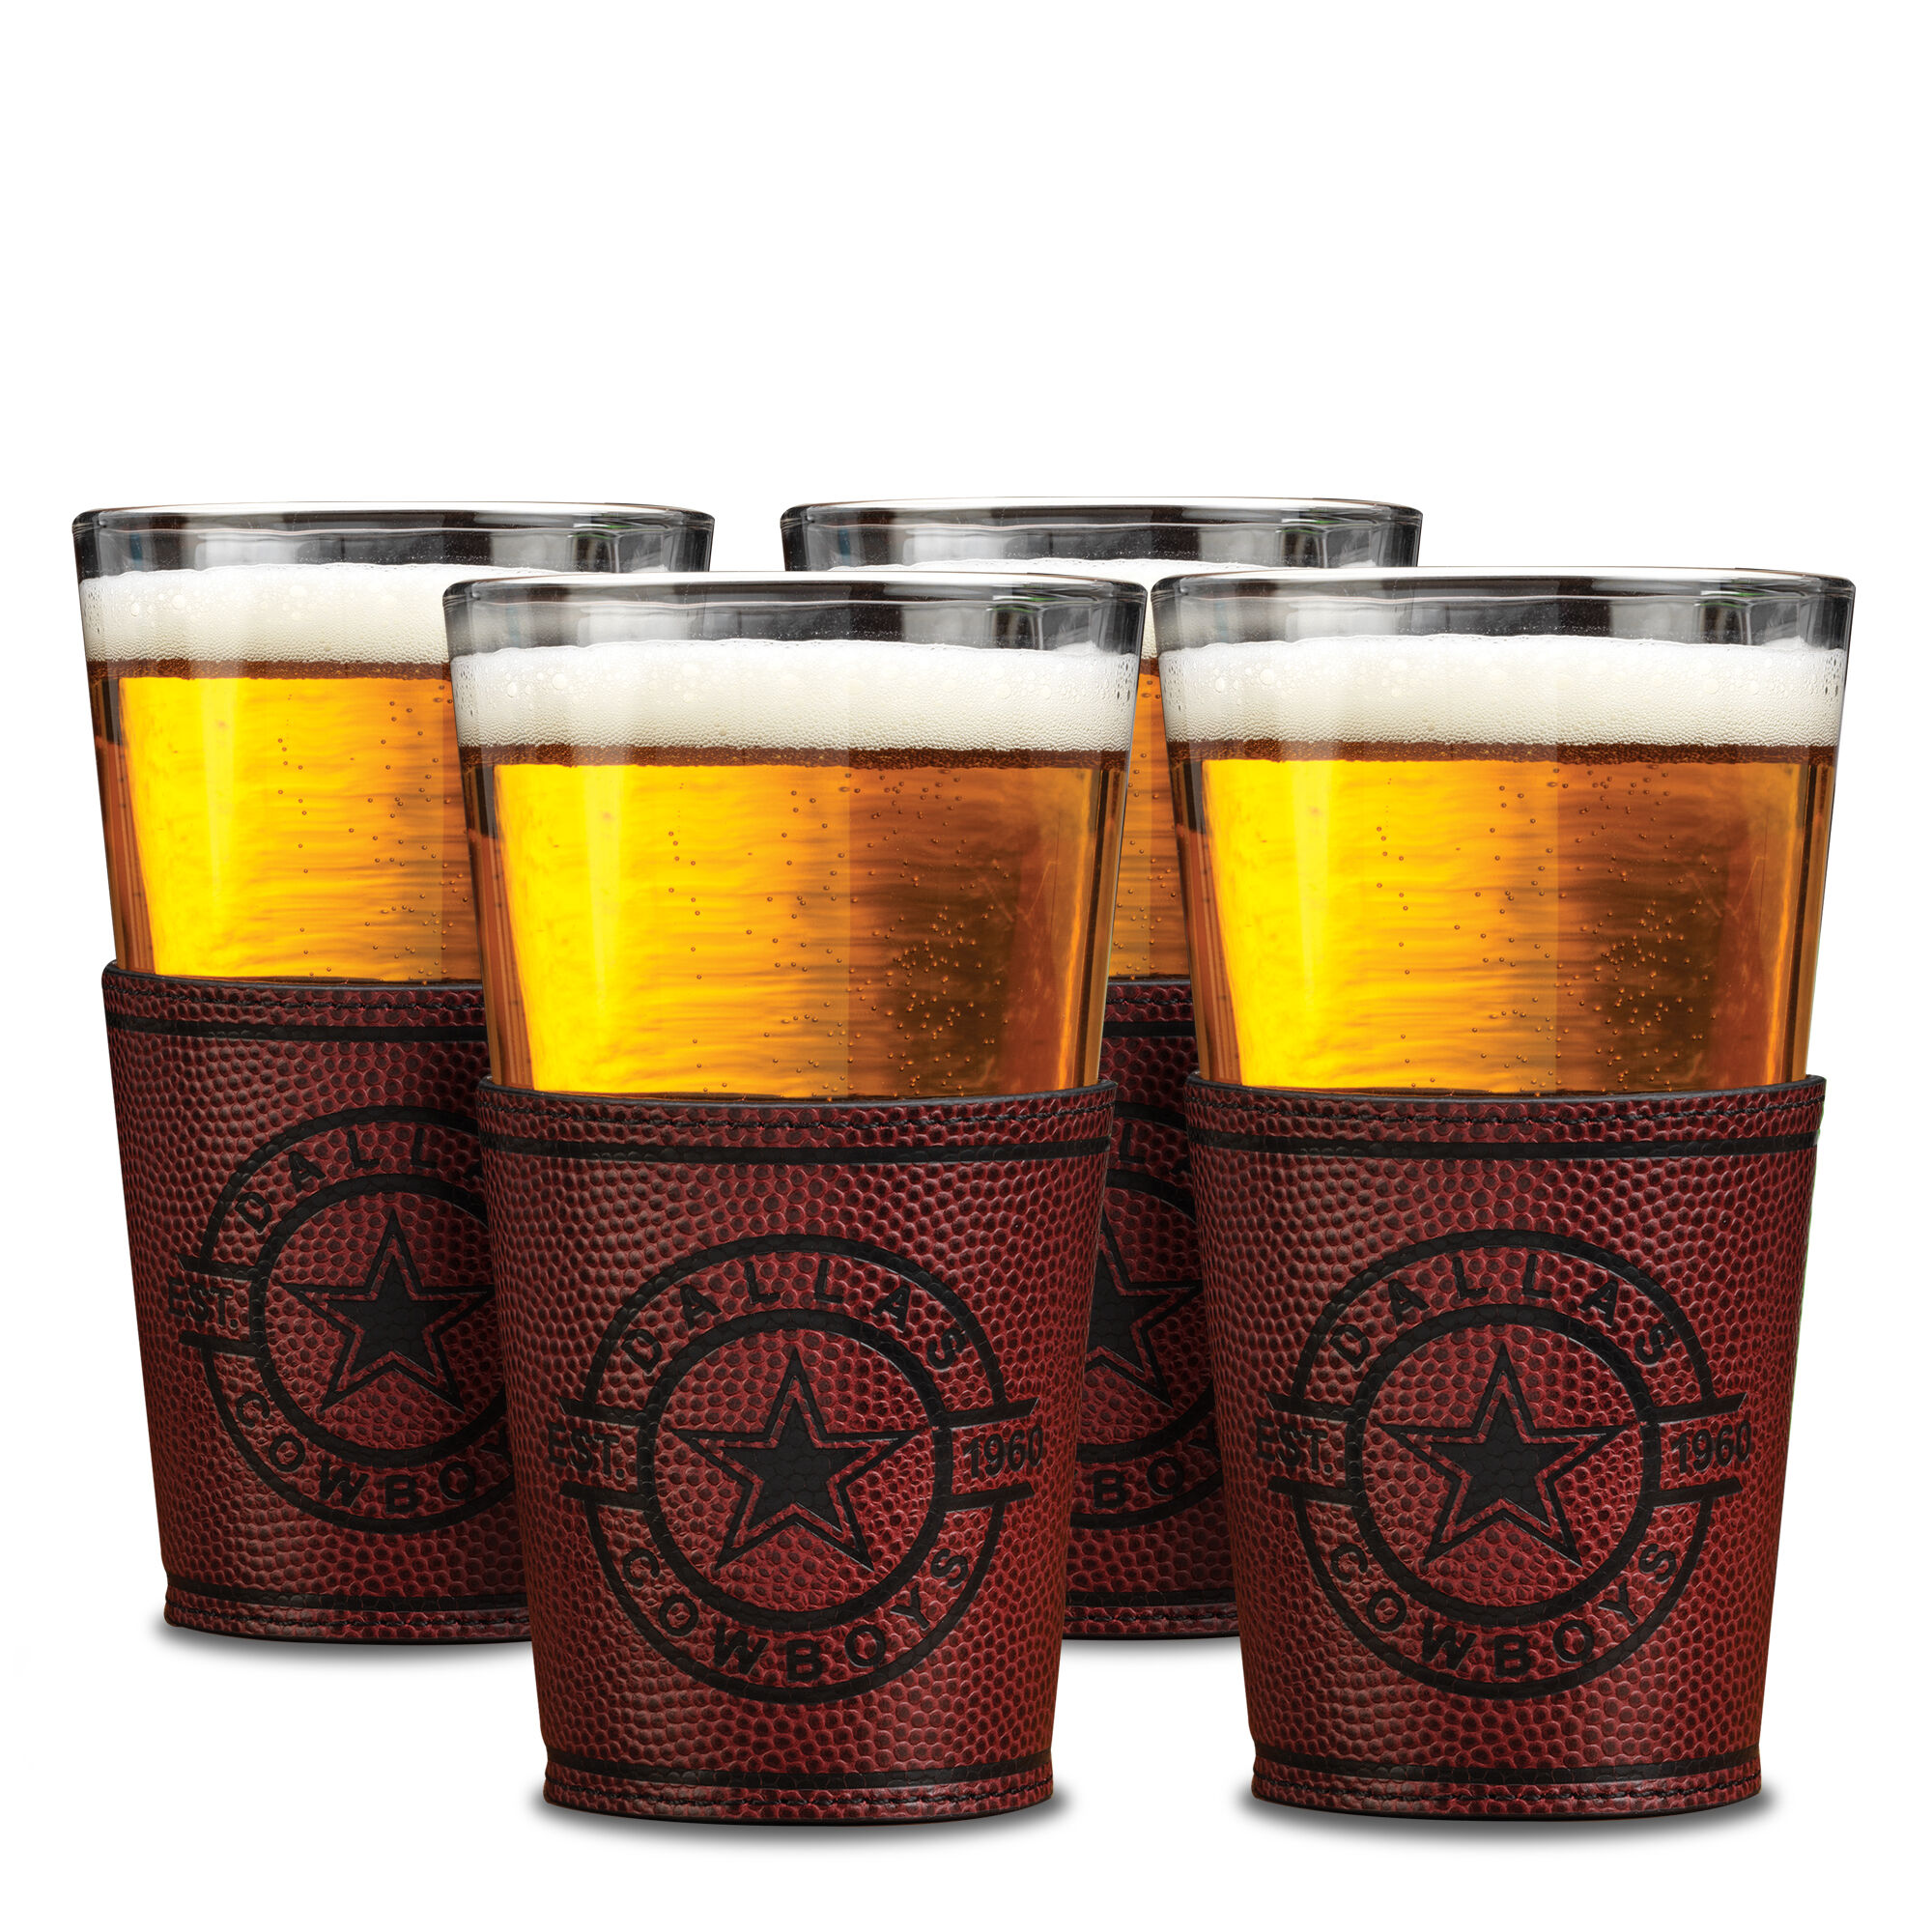 Cowboys Leather Wrapped Pint Glasses 6127 0013 a main